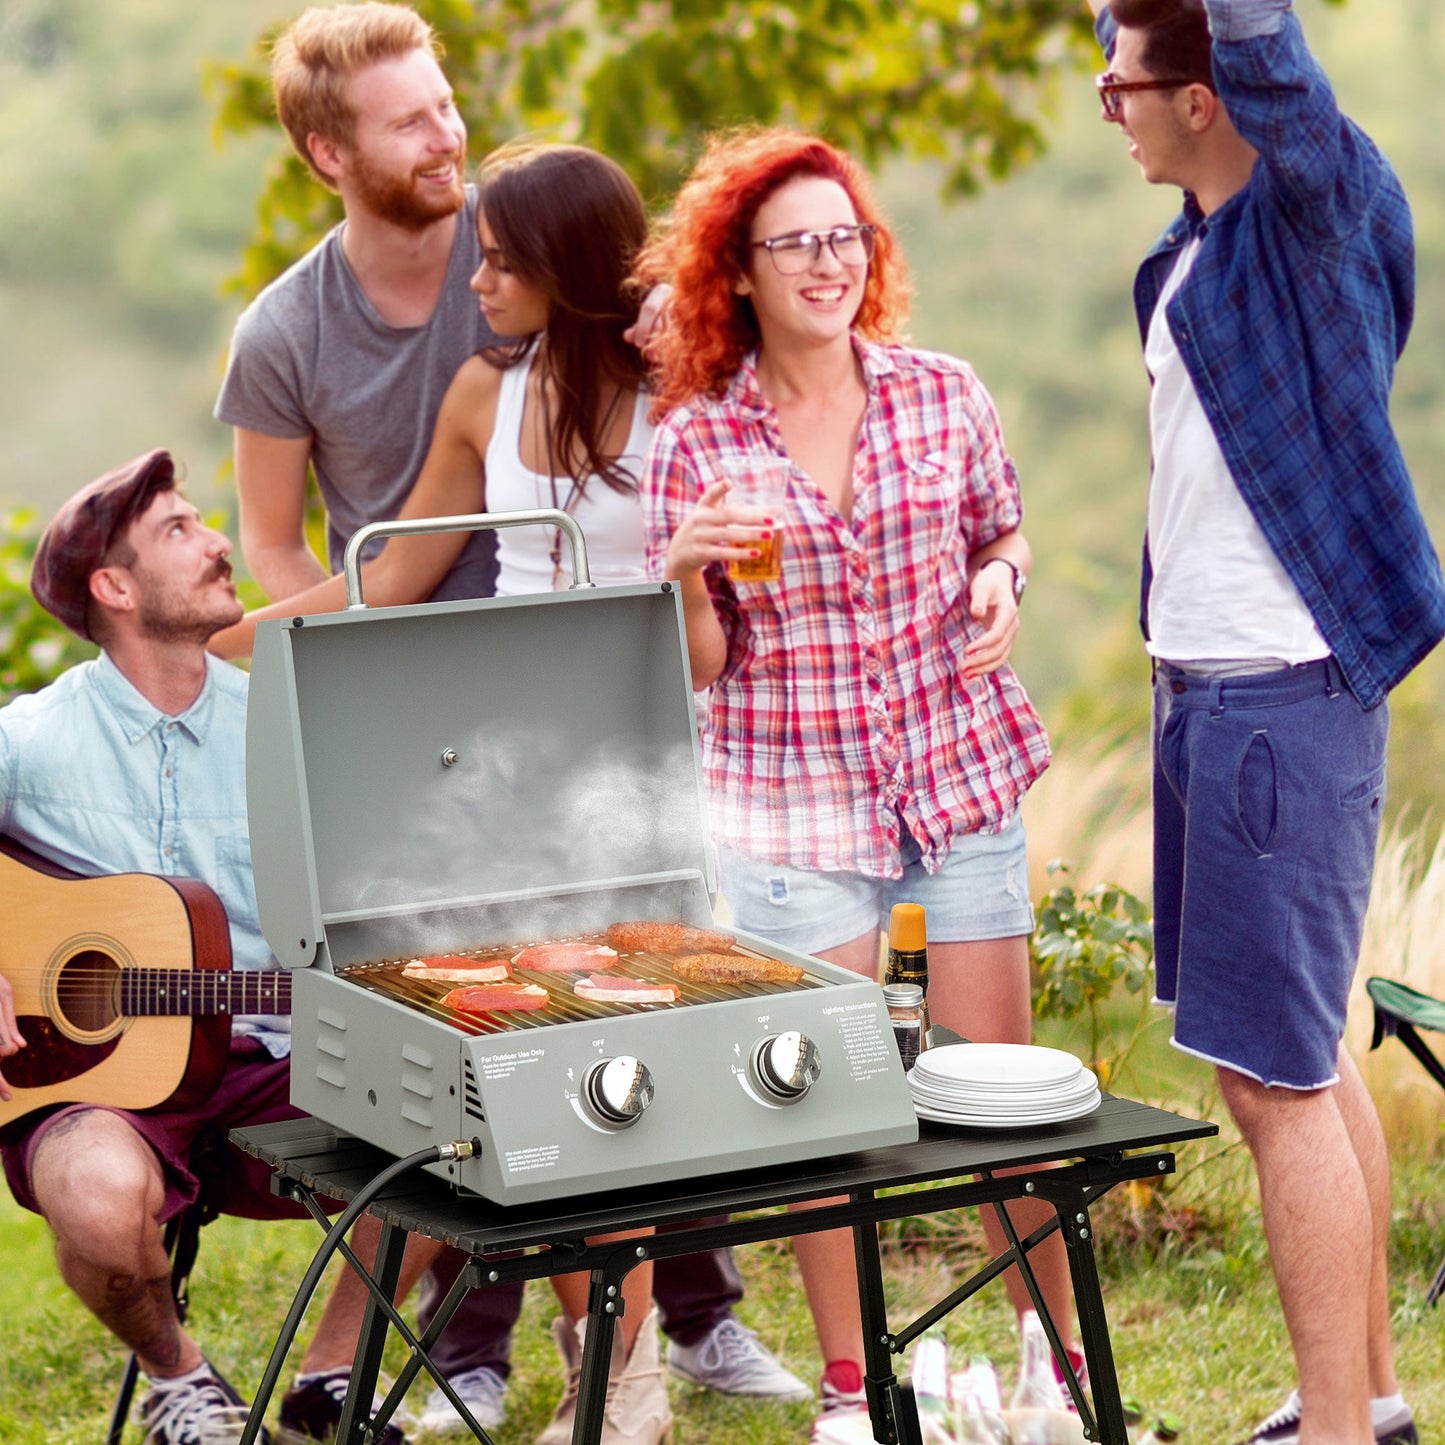 Outdoor and Garden-2 Burner Propane Gas Grill Outdoor Portable Tabletop BBQ with Foldable Legs, Lid, Thermometer for Camping, Picnic, Backyard, Light Grey - Outdoor Style Company